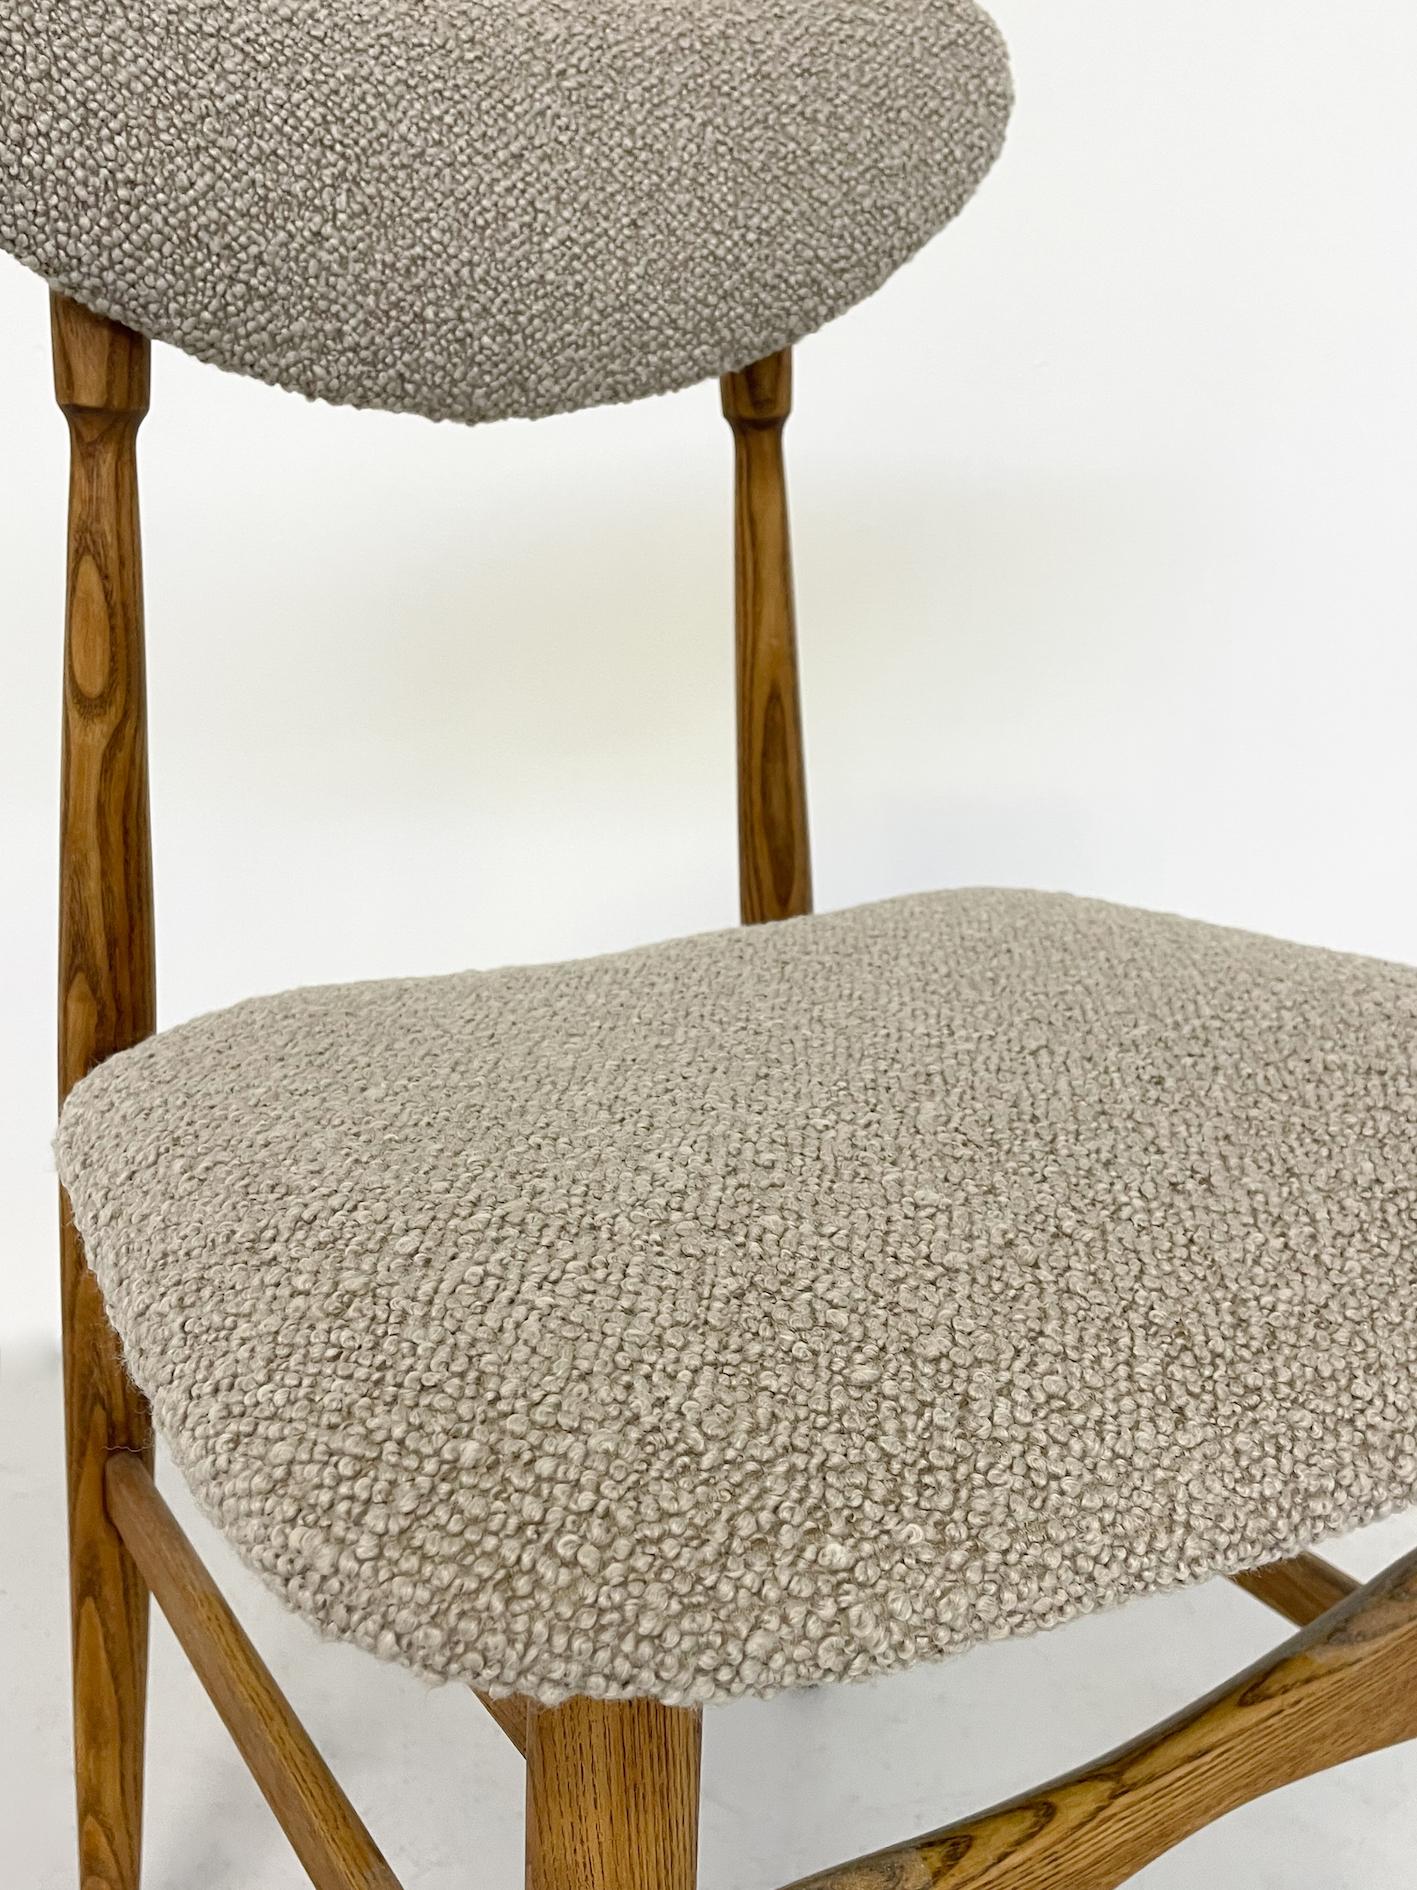 Mid-Century Modern Set of 12 Chairs, Italy, 1960s - New Upholstery For Sale 2